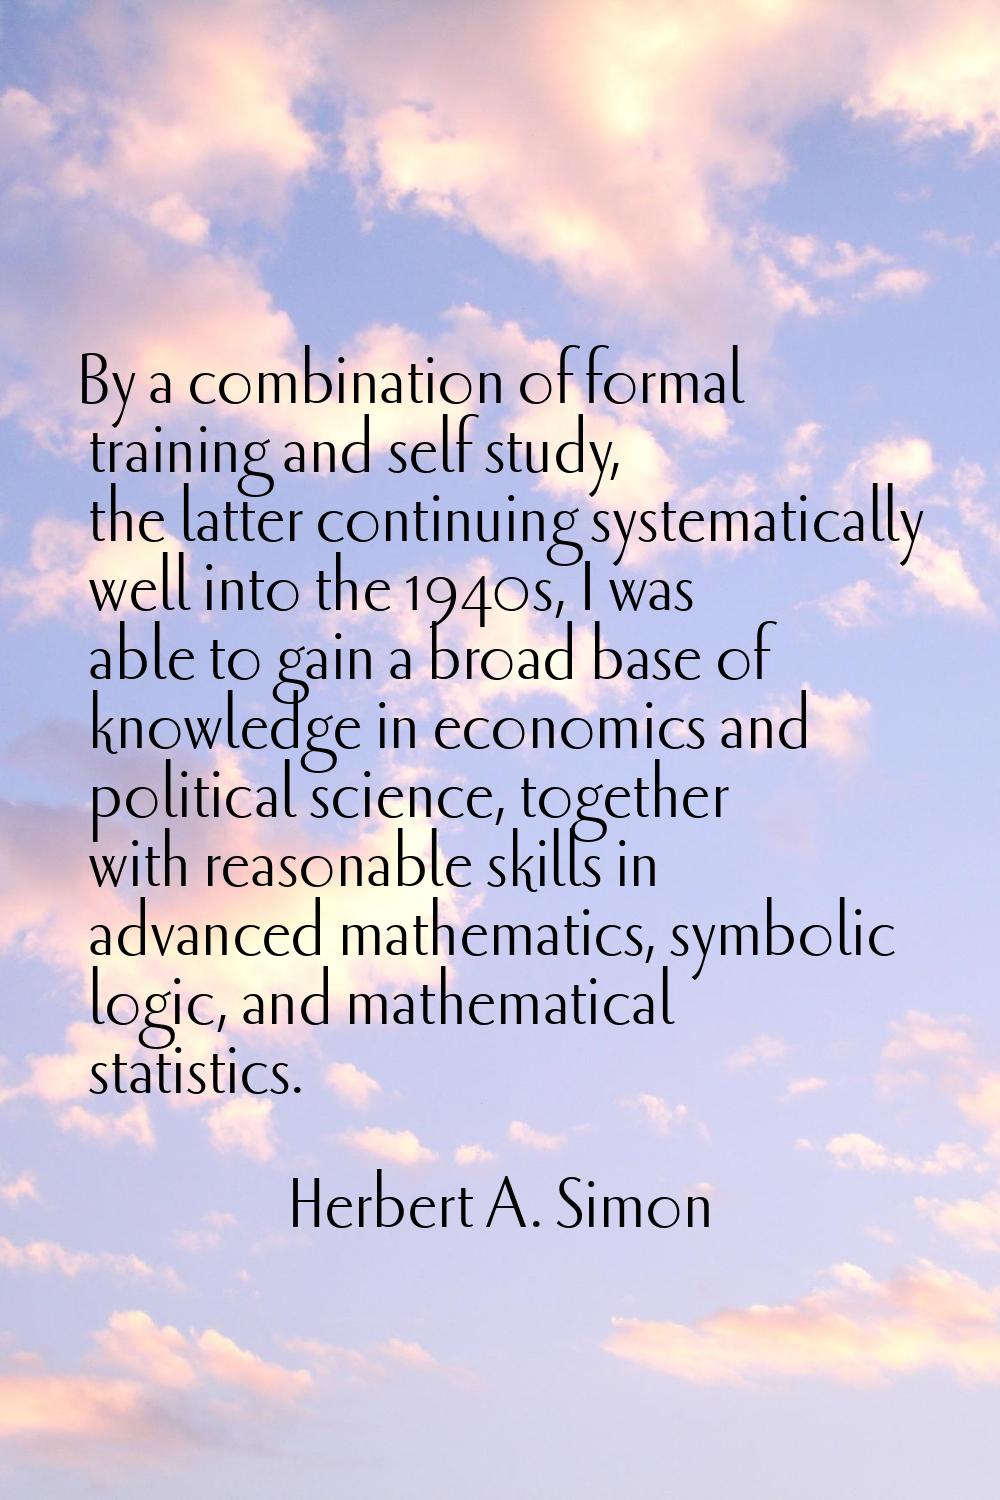 By a combination of formal training and self study, the latter continuing systematically well into 